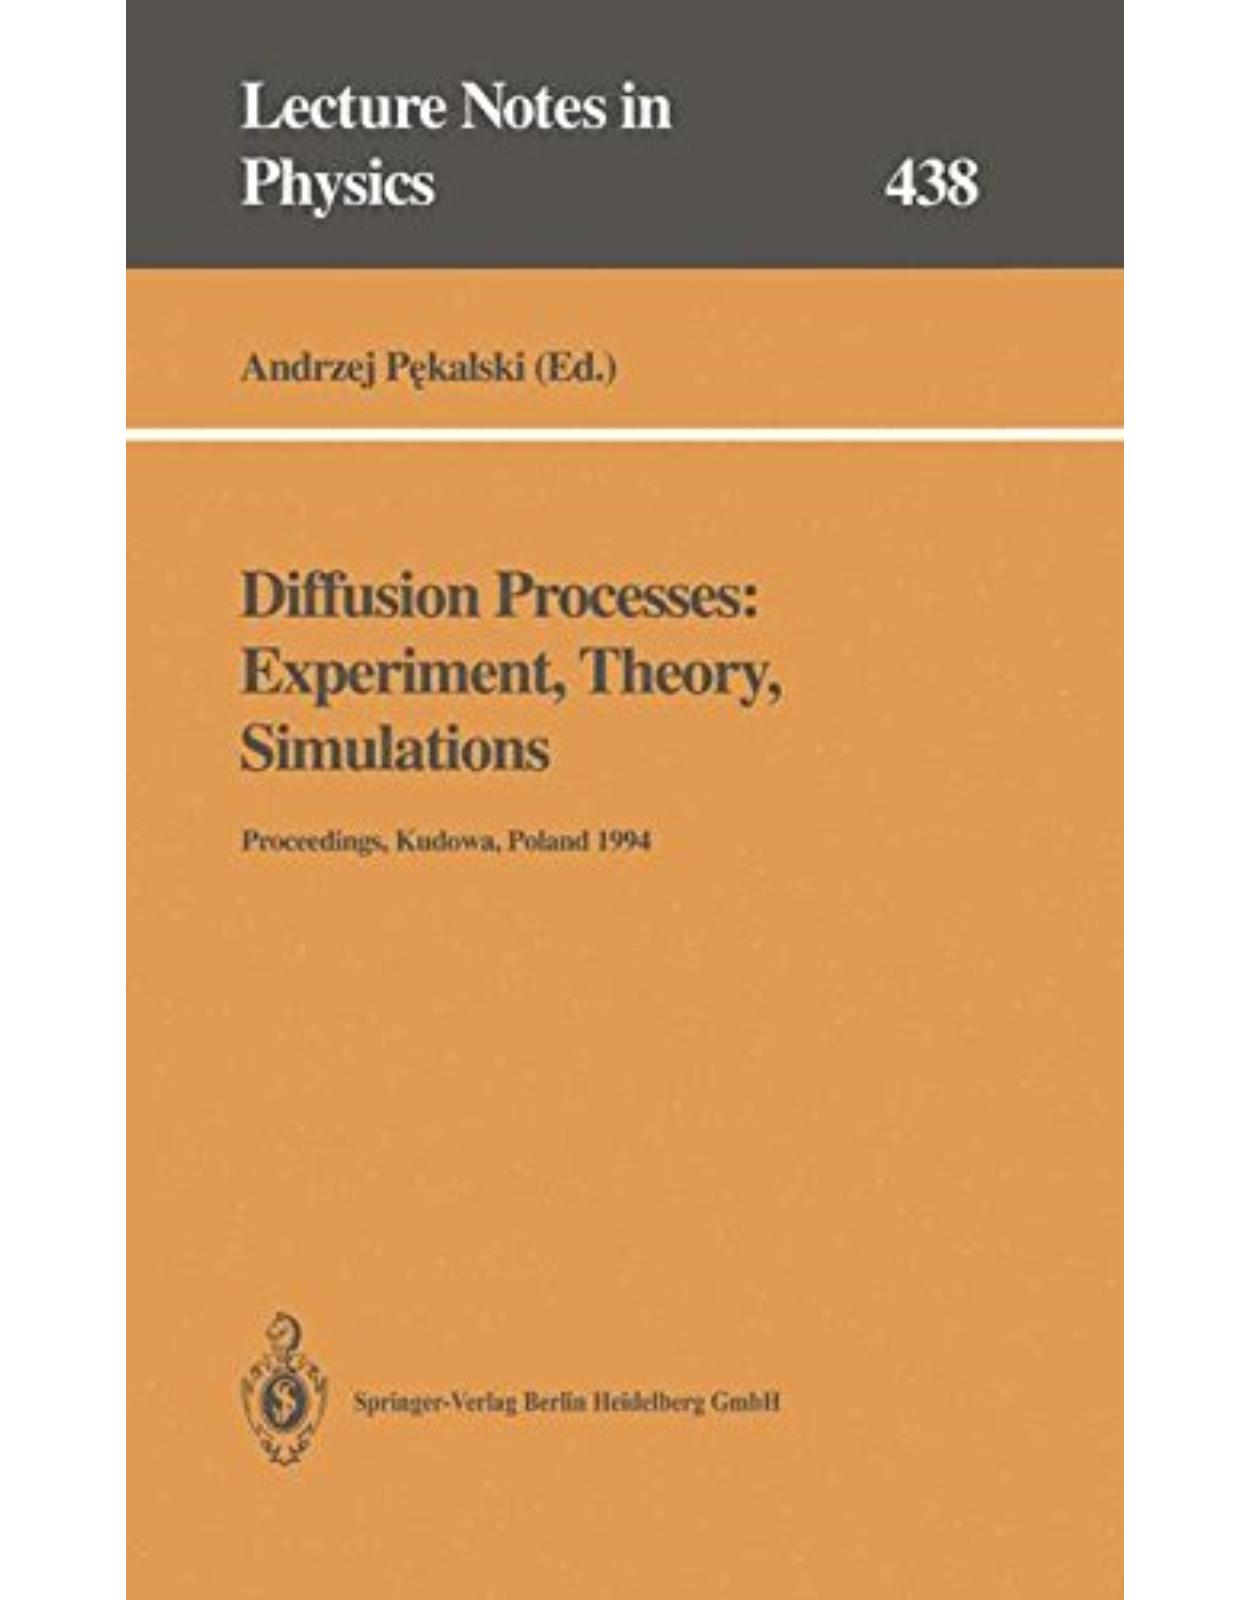 Diffusion Processes: Experiment, Theory, Simulations